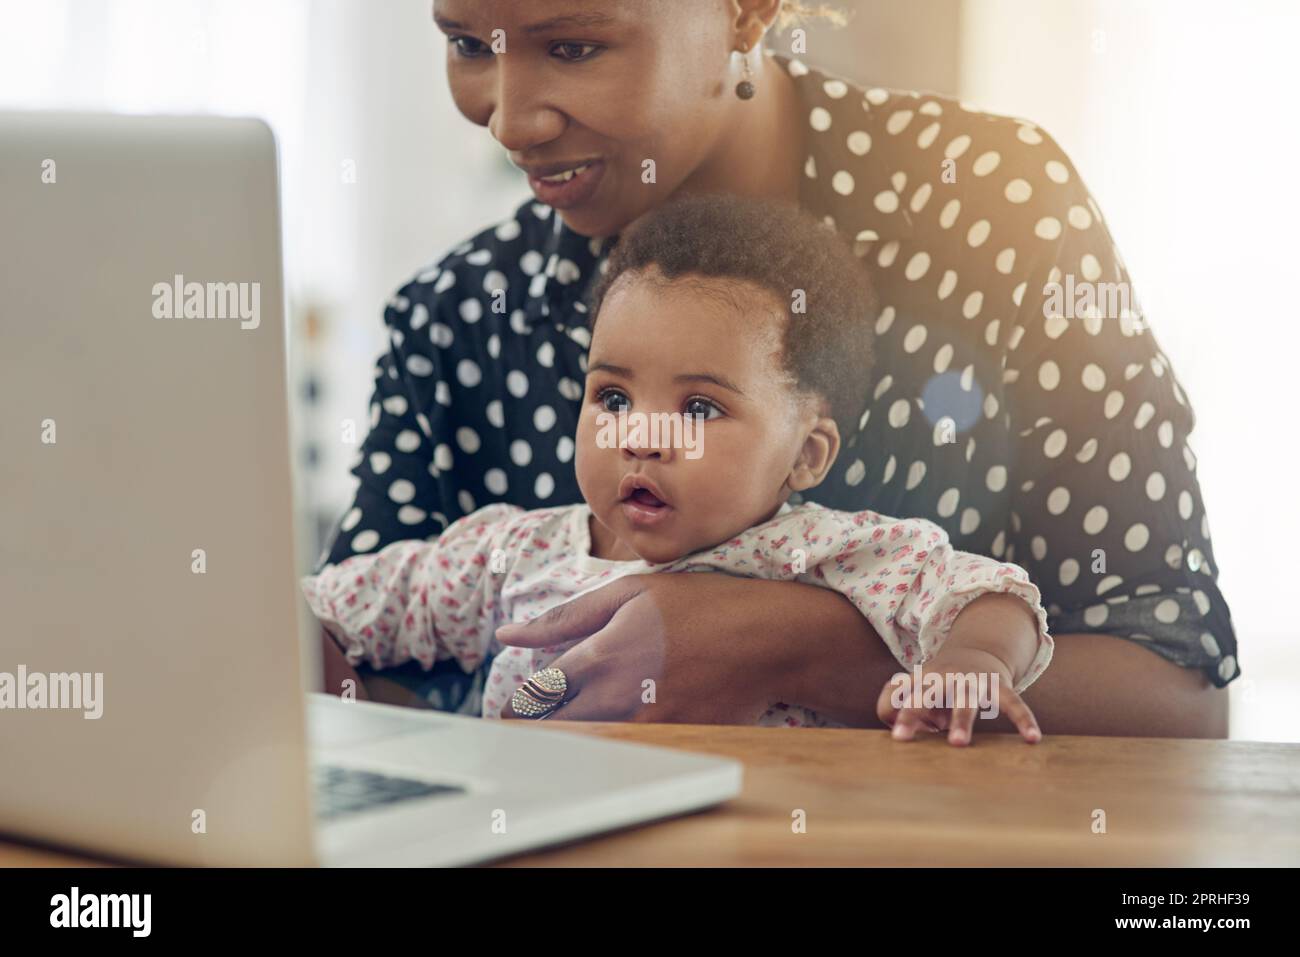 Discovering the world of technology. a mother and her baby girl sitting in front of a laptop. Stock Photo